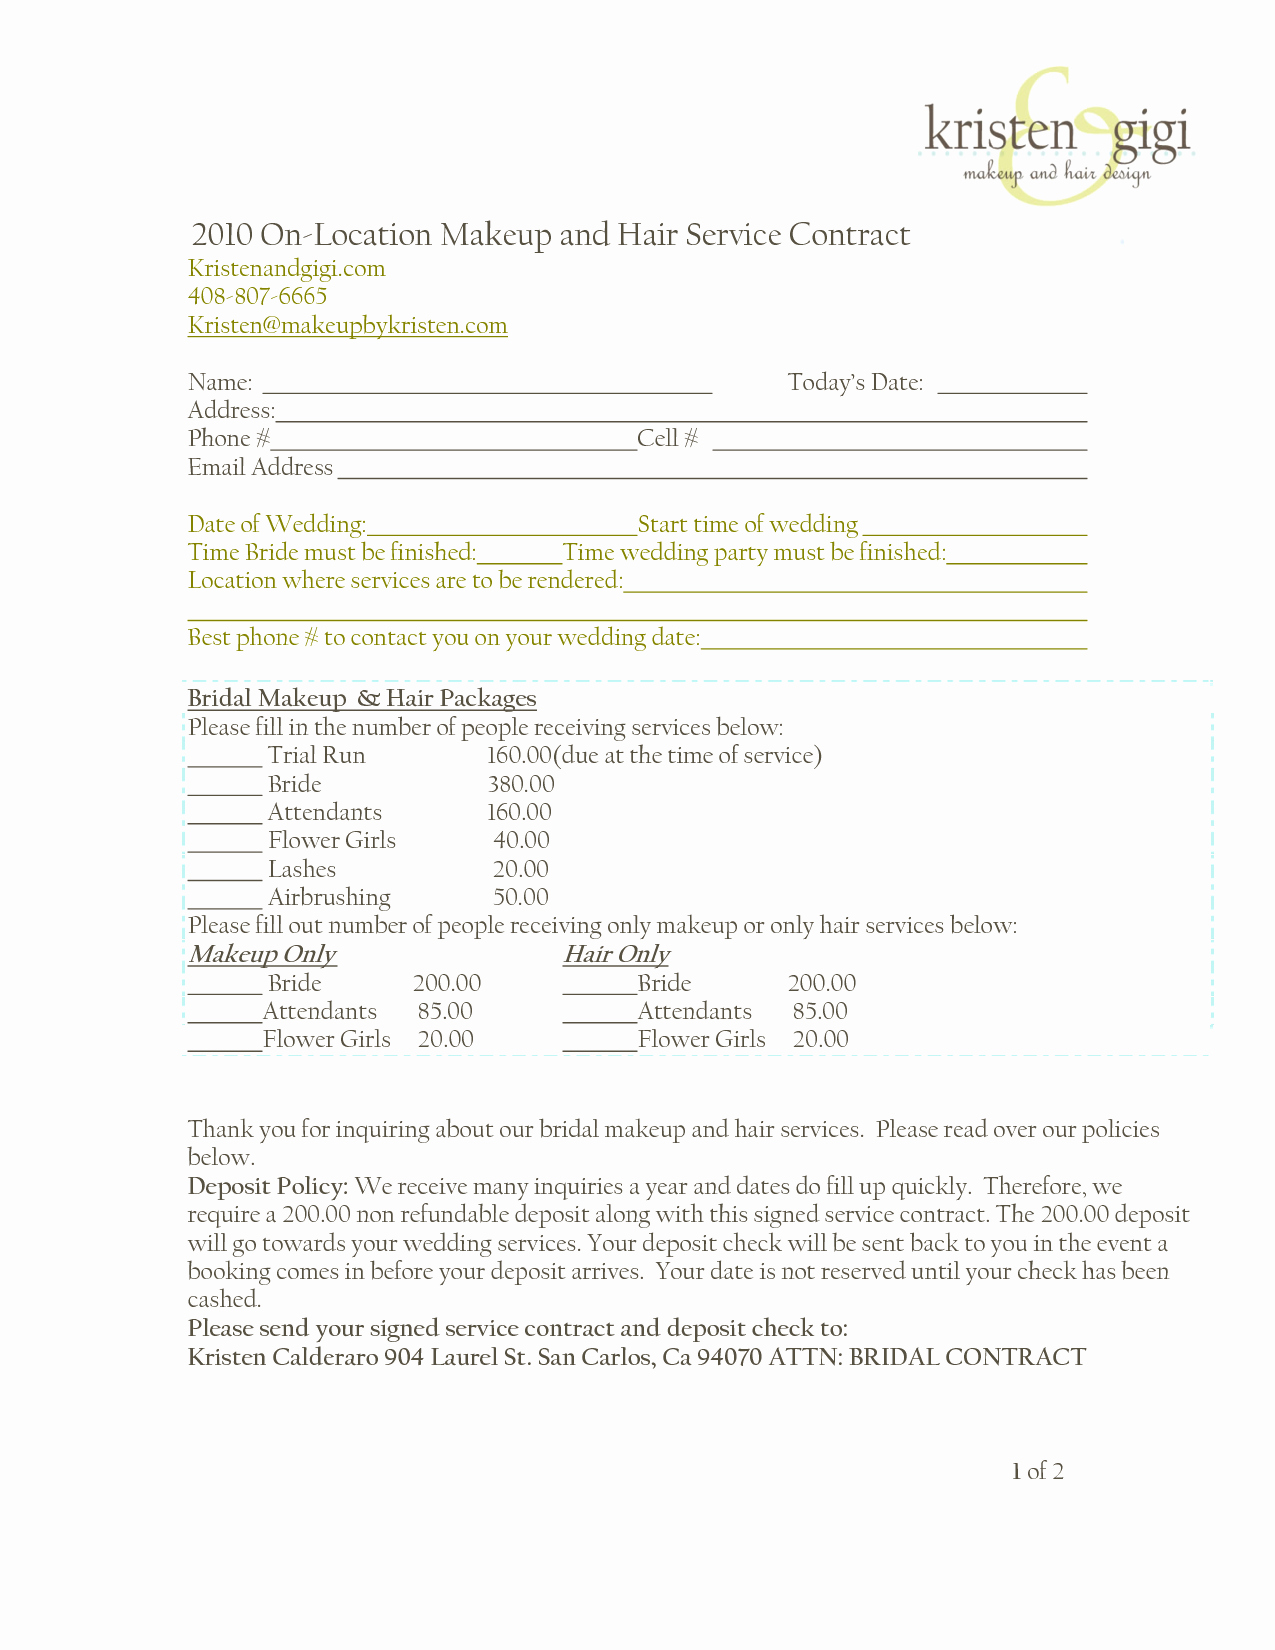 Freelance Makeup Artist Contract Templates Awesome Bridalhaircotract